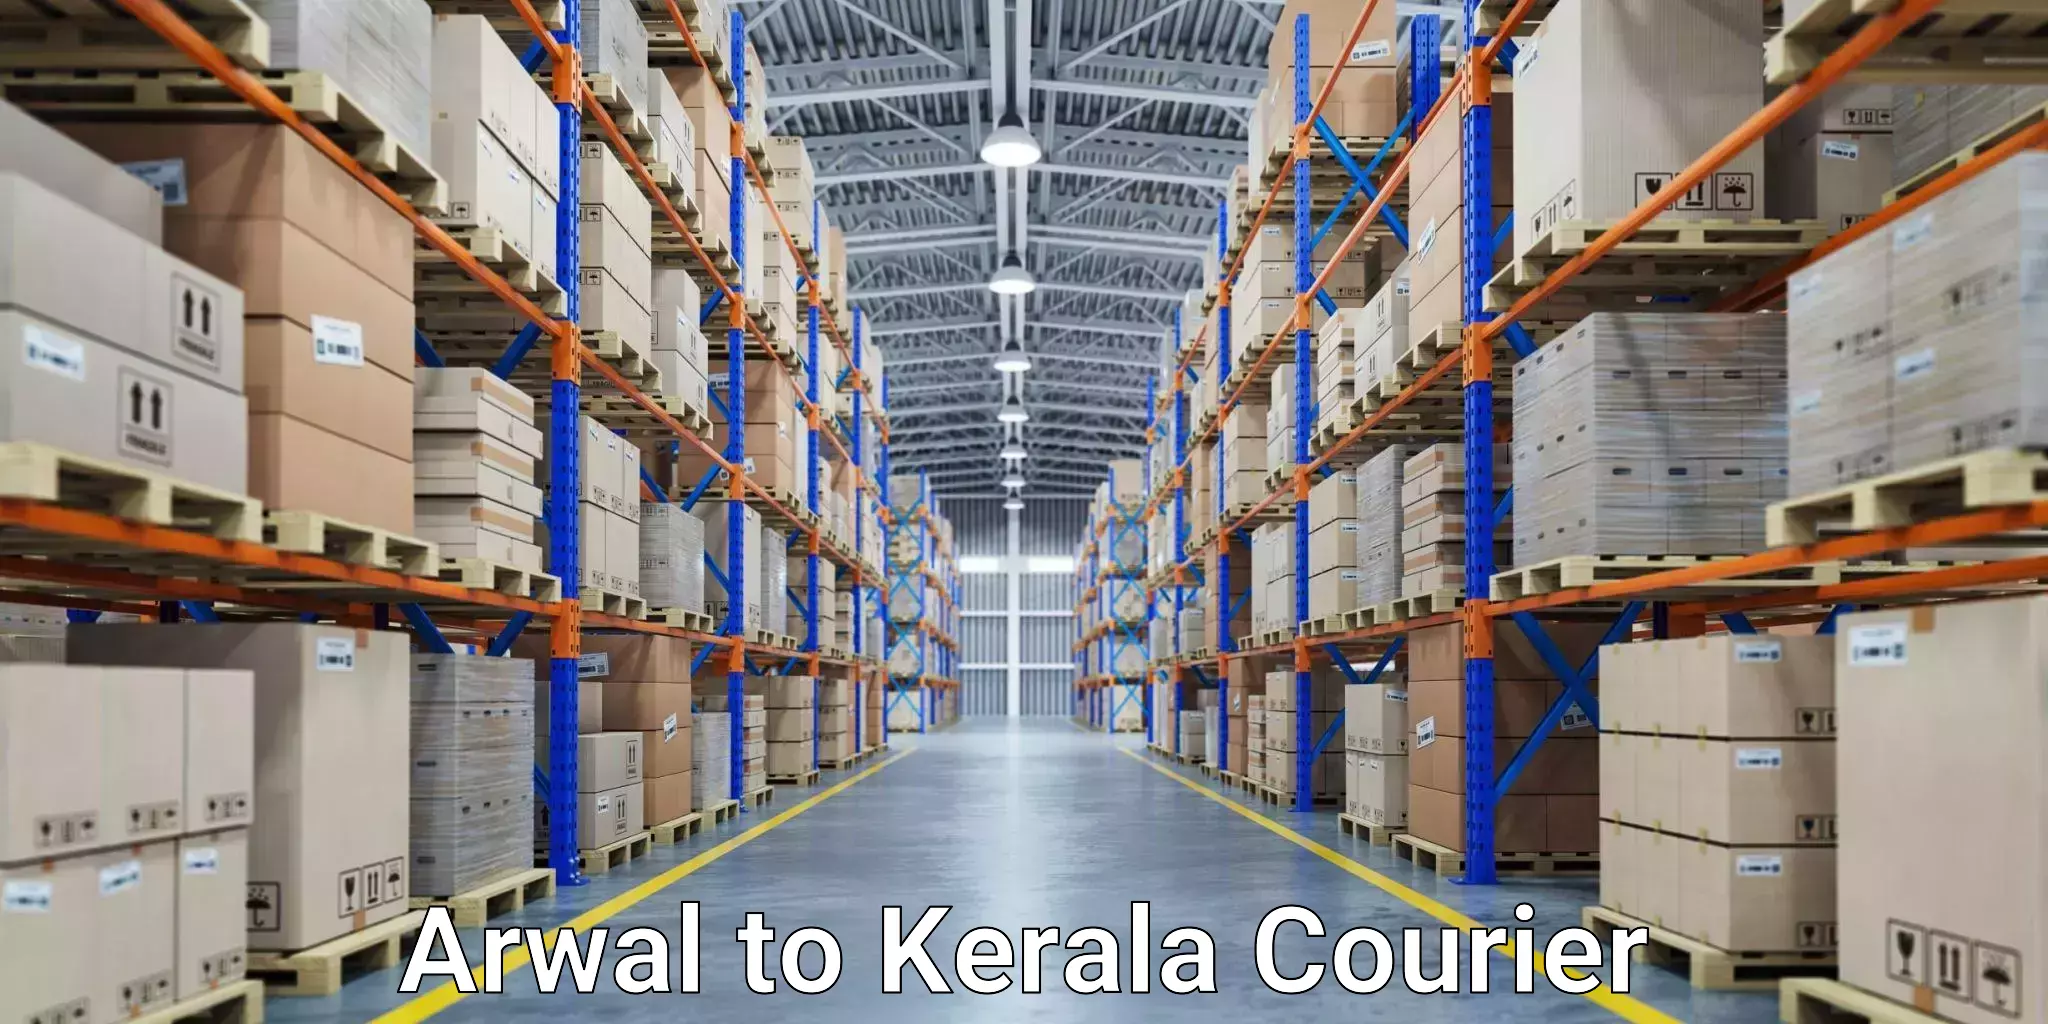 Customized shipping options Arwal to Kerala